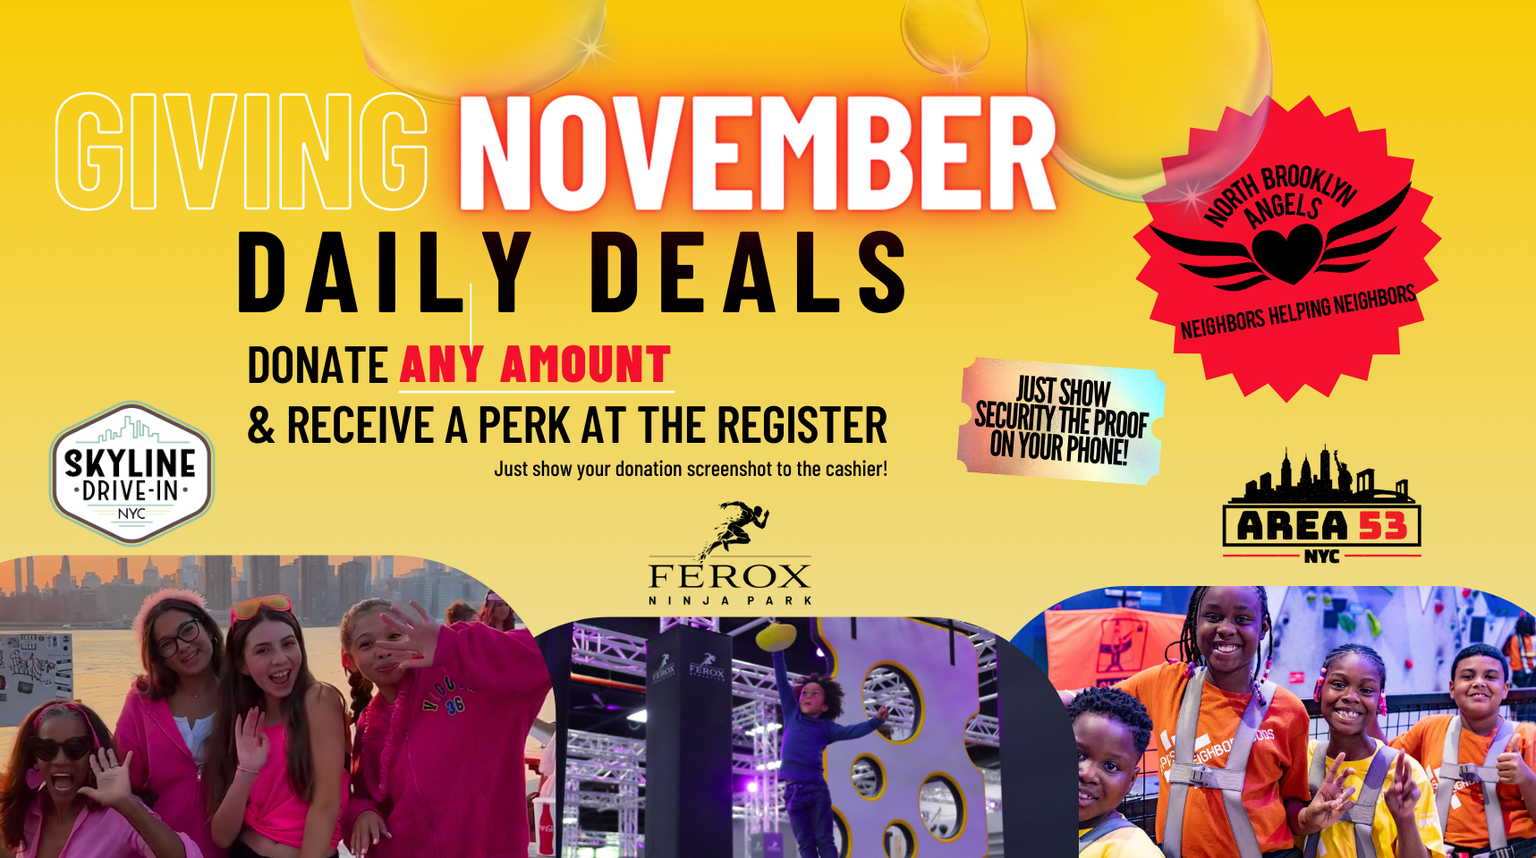 Giving November daily deals! Donate any amount and receive a perk at the register! Just show your donation screenshot to the cashier! Valid at Skyline Drive-In, Ferox Ninja Park, and Area 53 NYC!